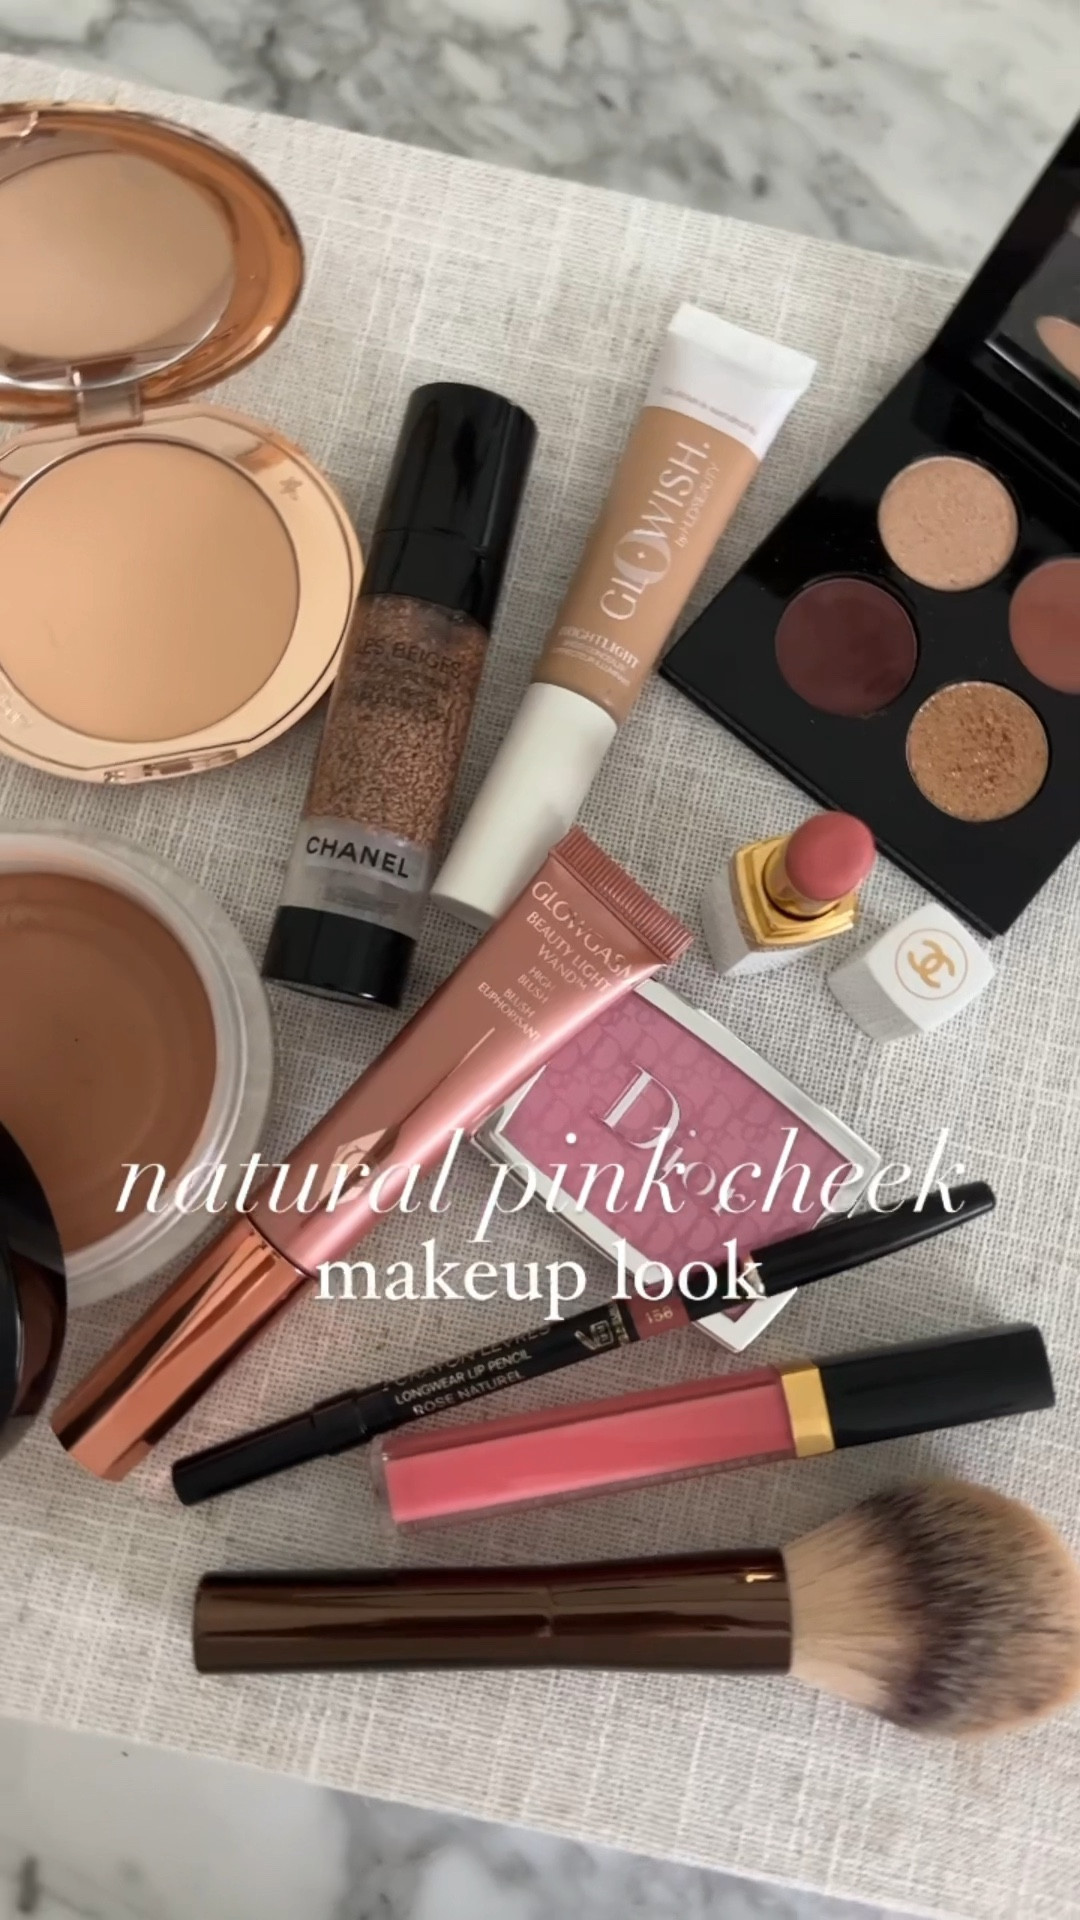 7 designer makeup brands that are worth the investment